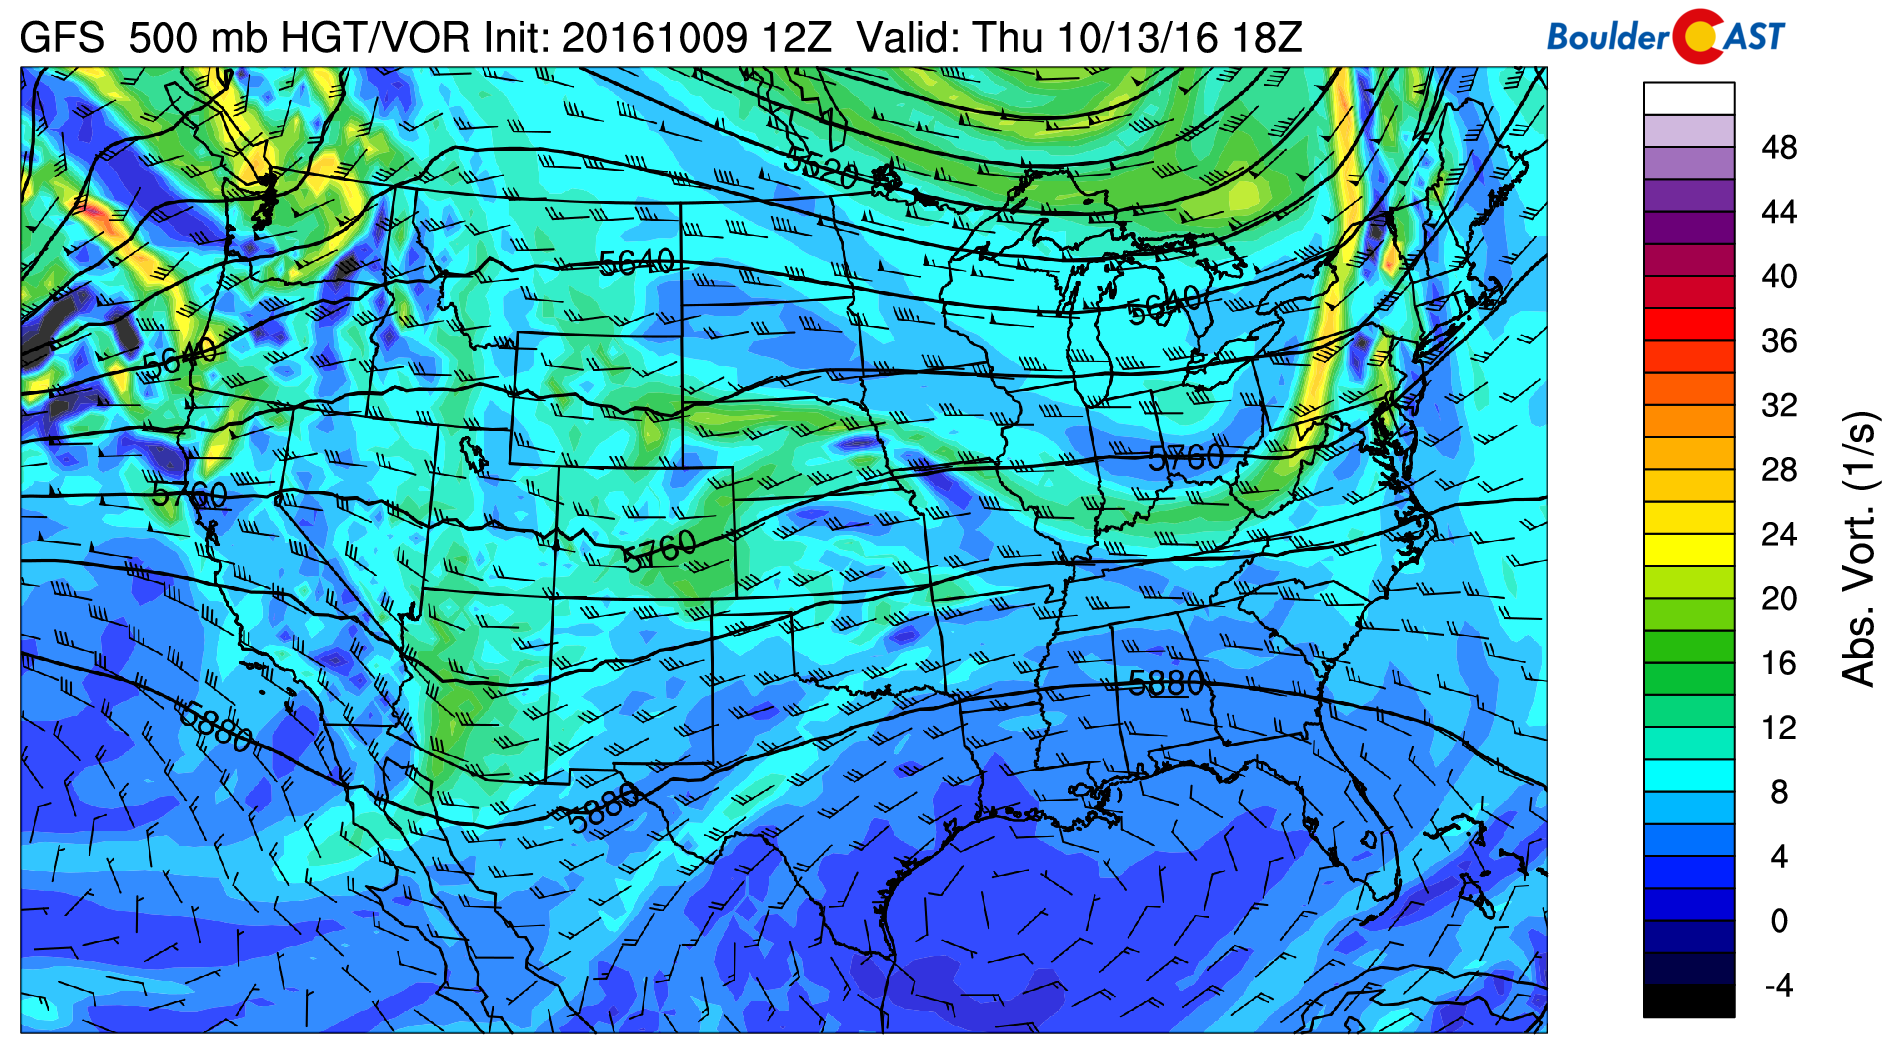 GFS 500 mb height and vorticity field for Thursday